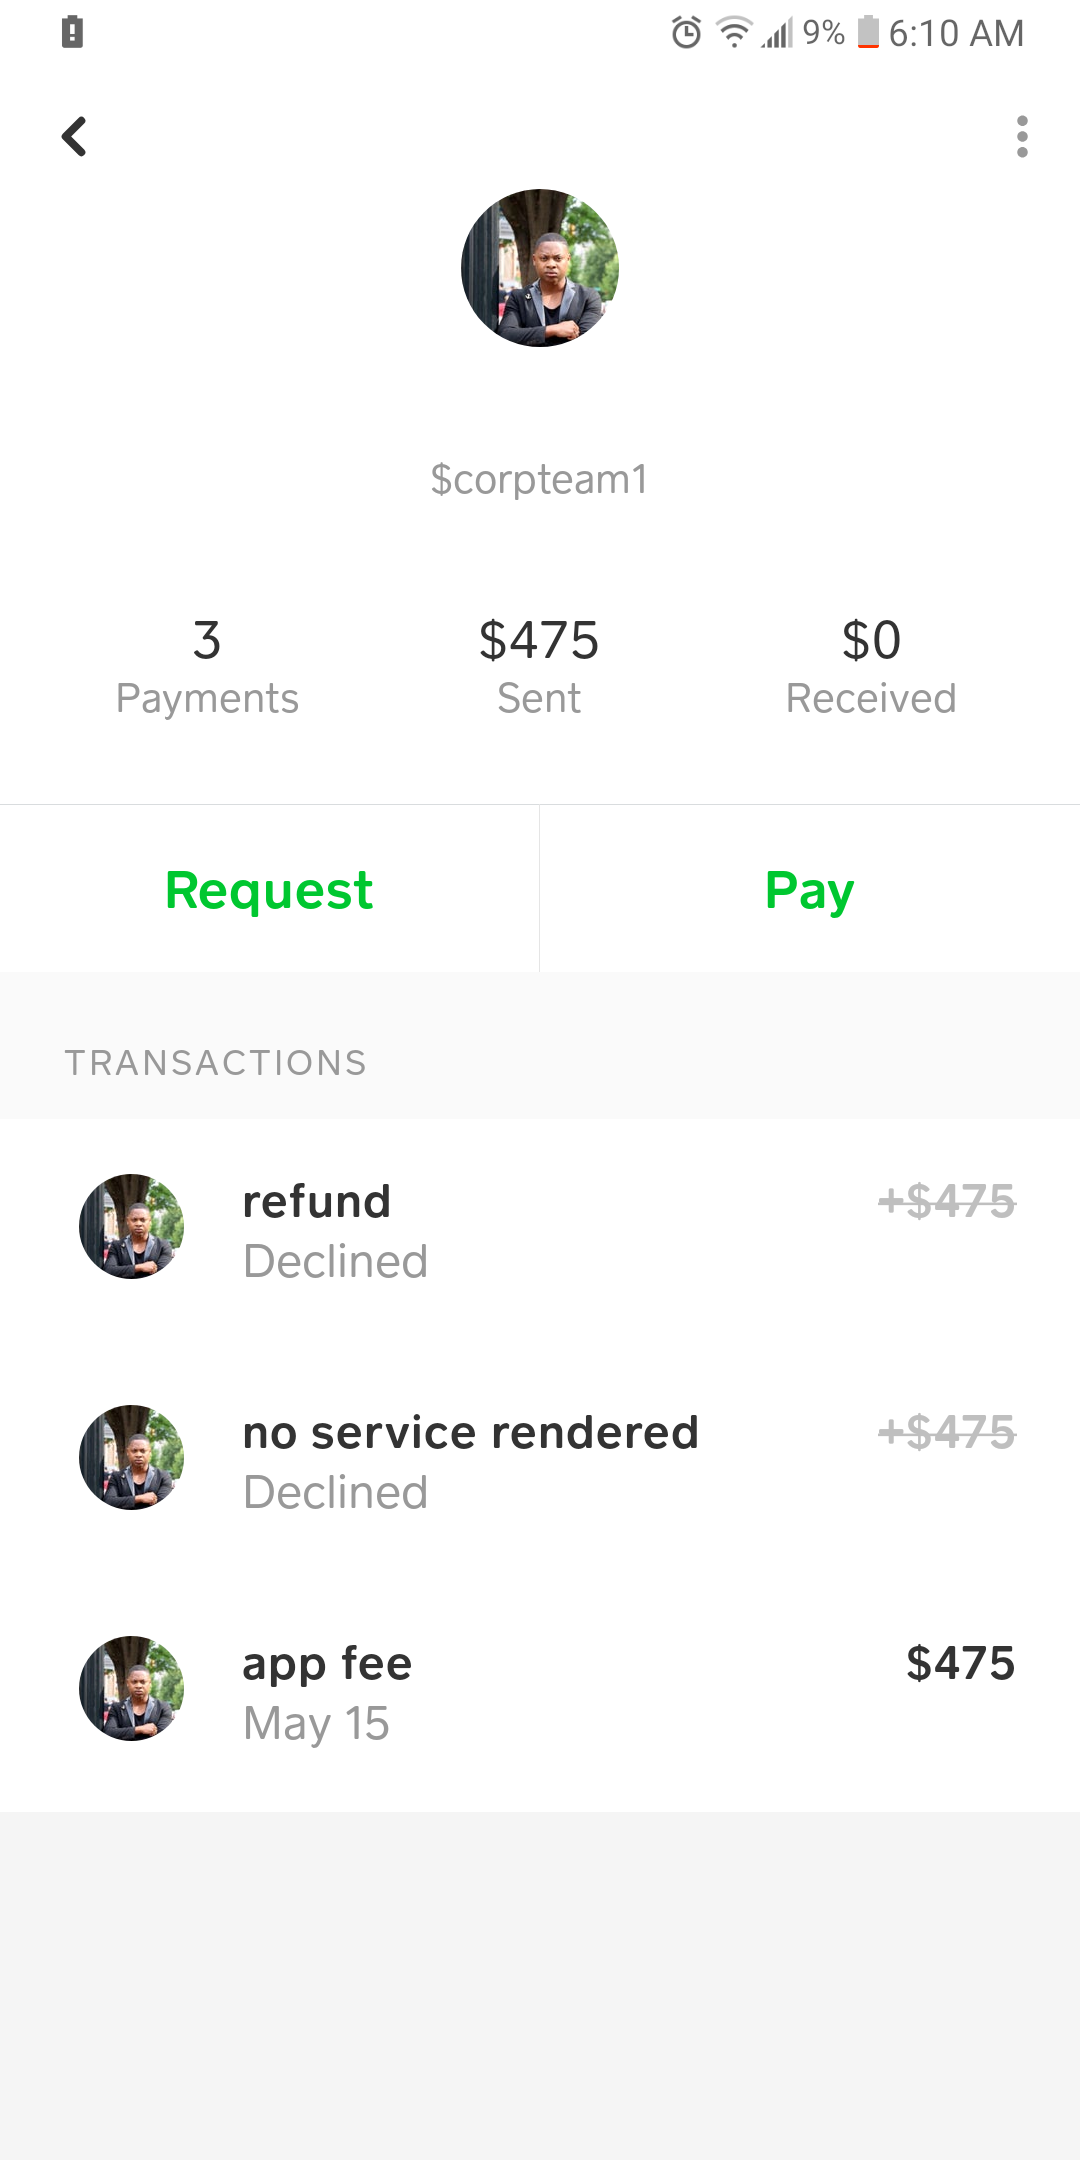 Money sent, no service or refund given